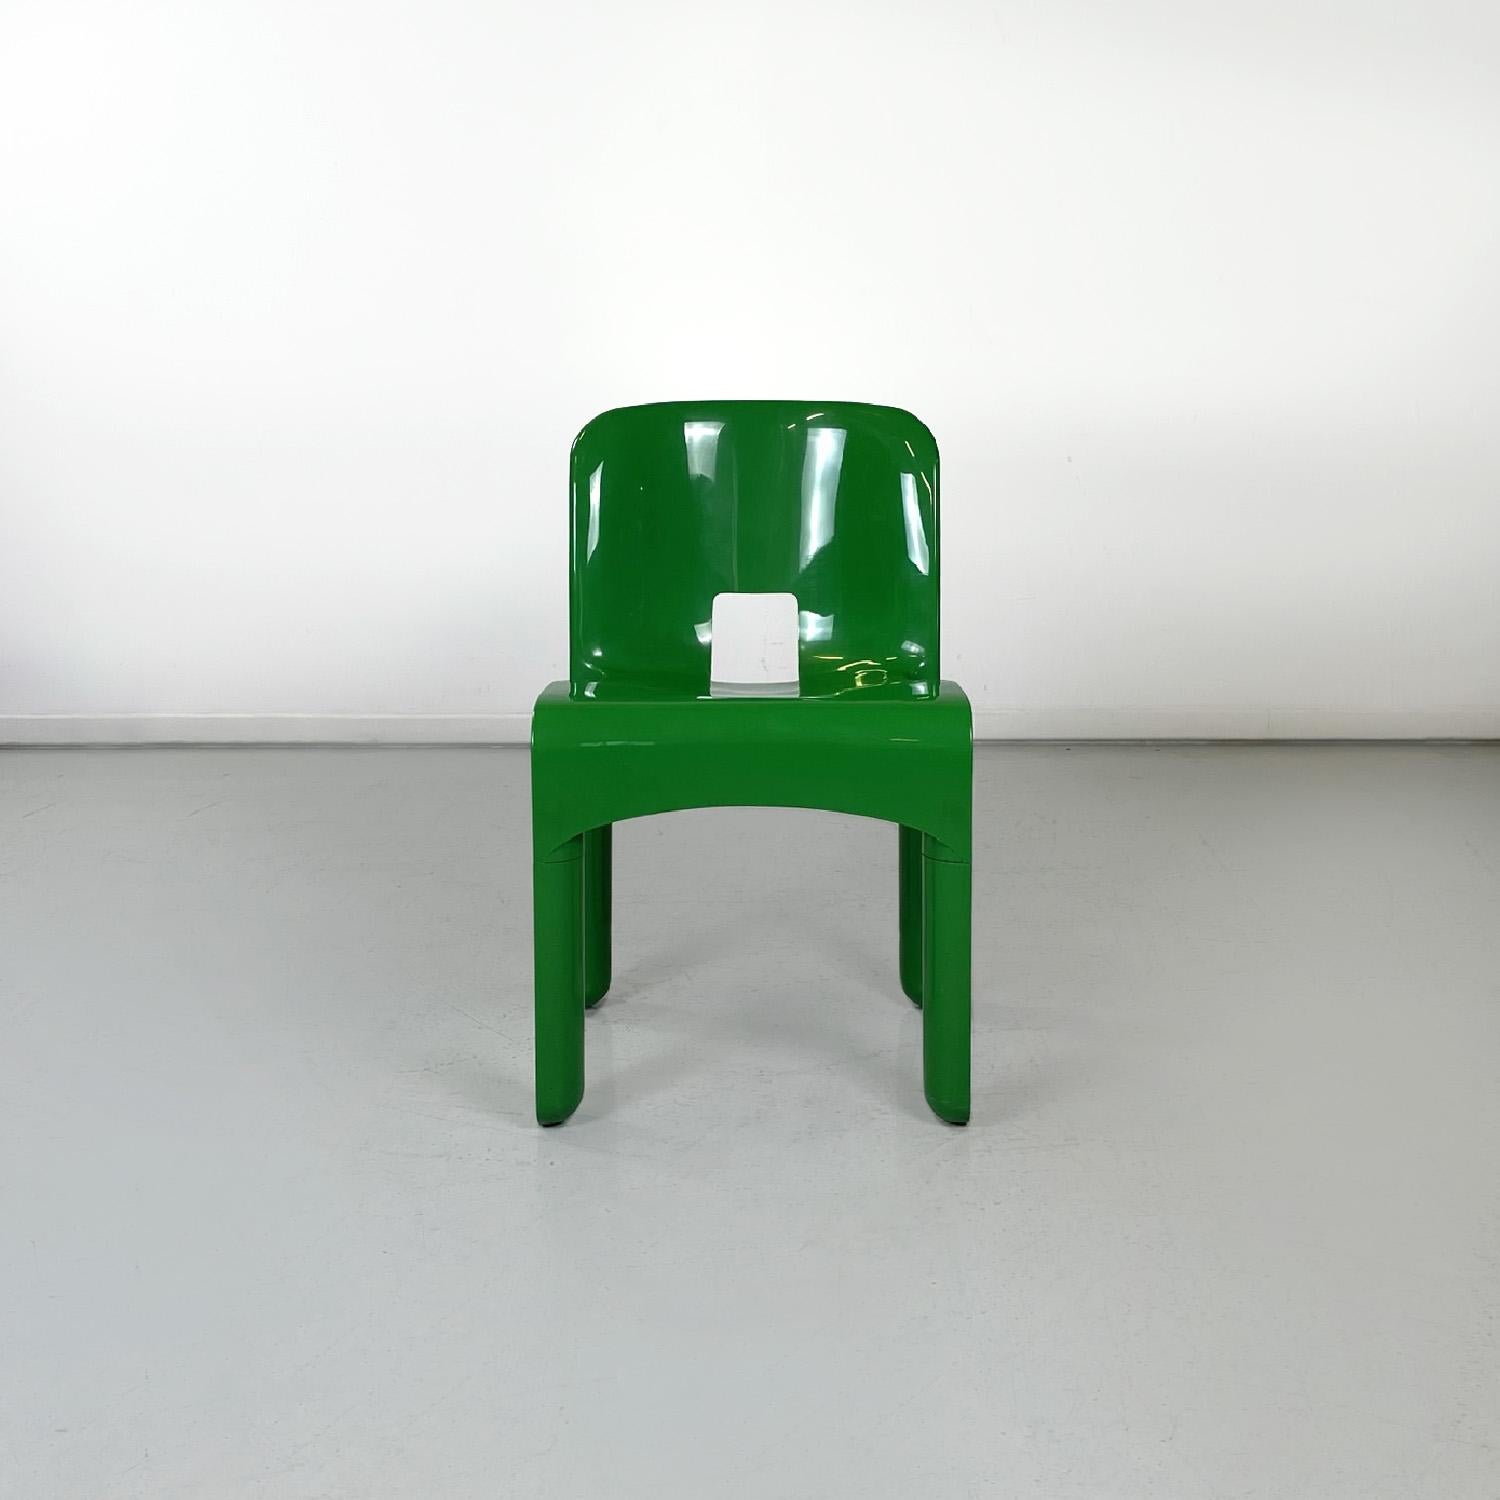 Italian modern green Chairs 4868 Universal Chair by Joe Colombo Kartell, 1970s
Pair of chairs mod. 4868, also known as the Sedia Universale, in glossy green ABS plastic. The slightly curved backrest is rectangular with rounded upper corners. There